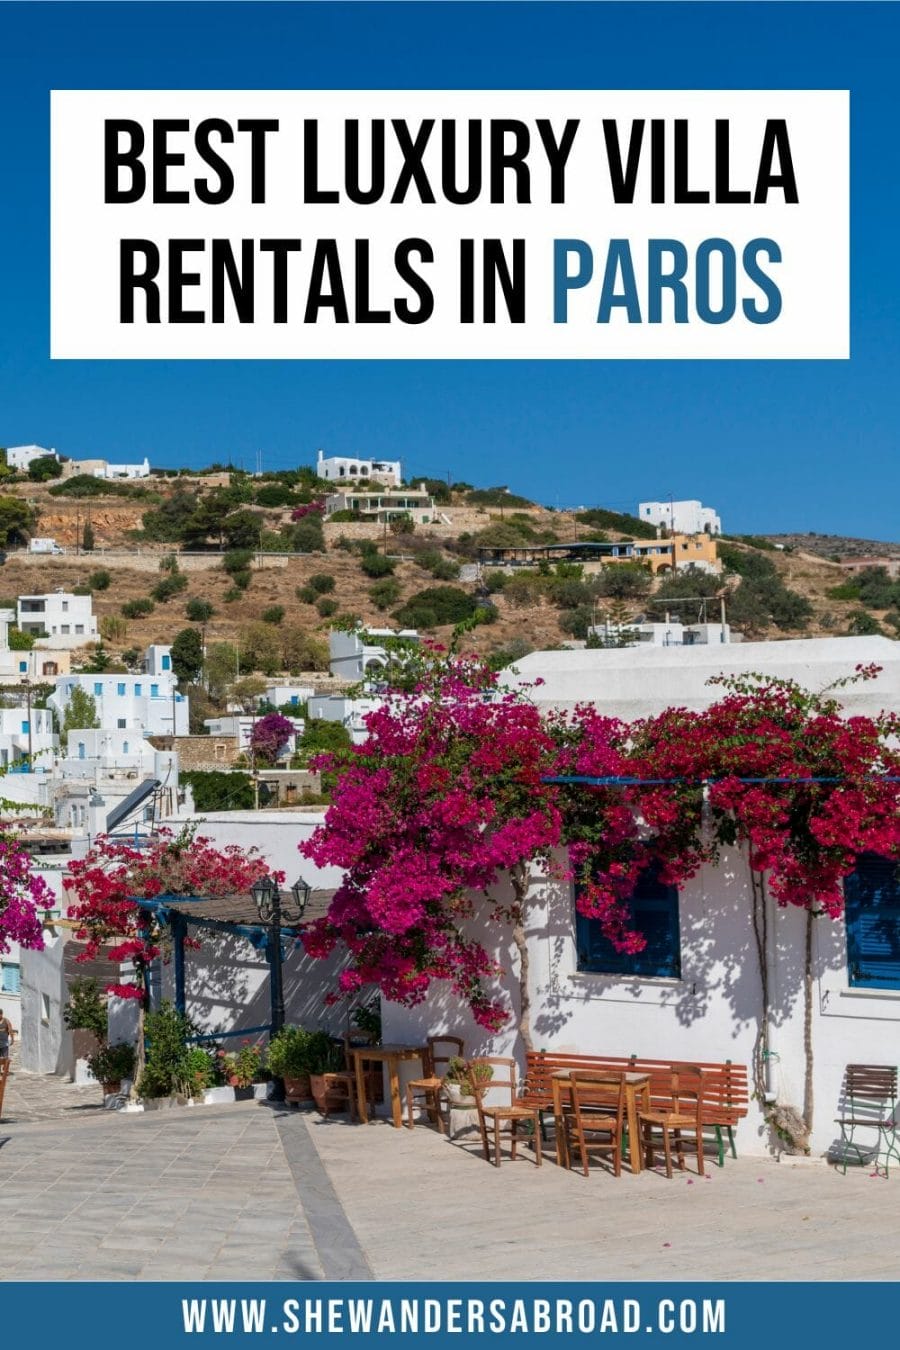 13 Epic Luxury Villas in Paros to Rent for Your Next Vacation